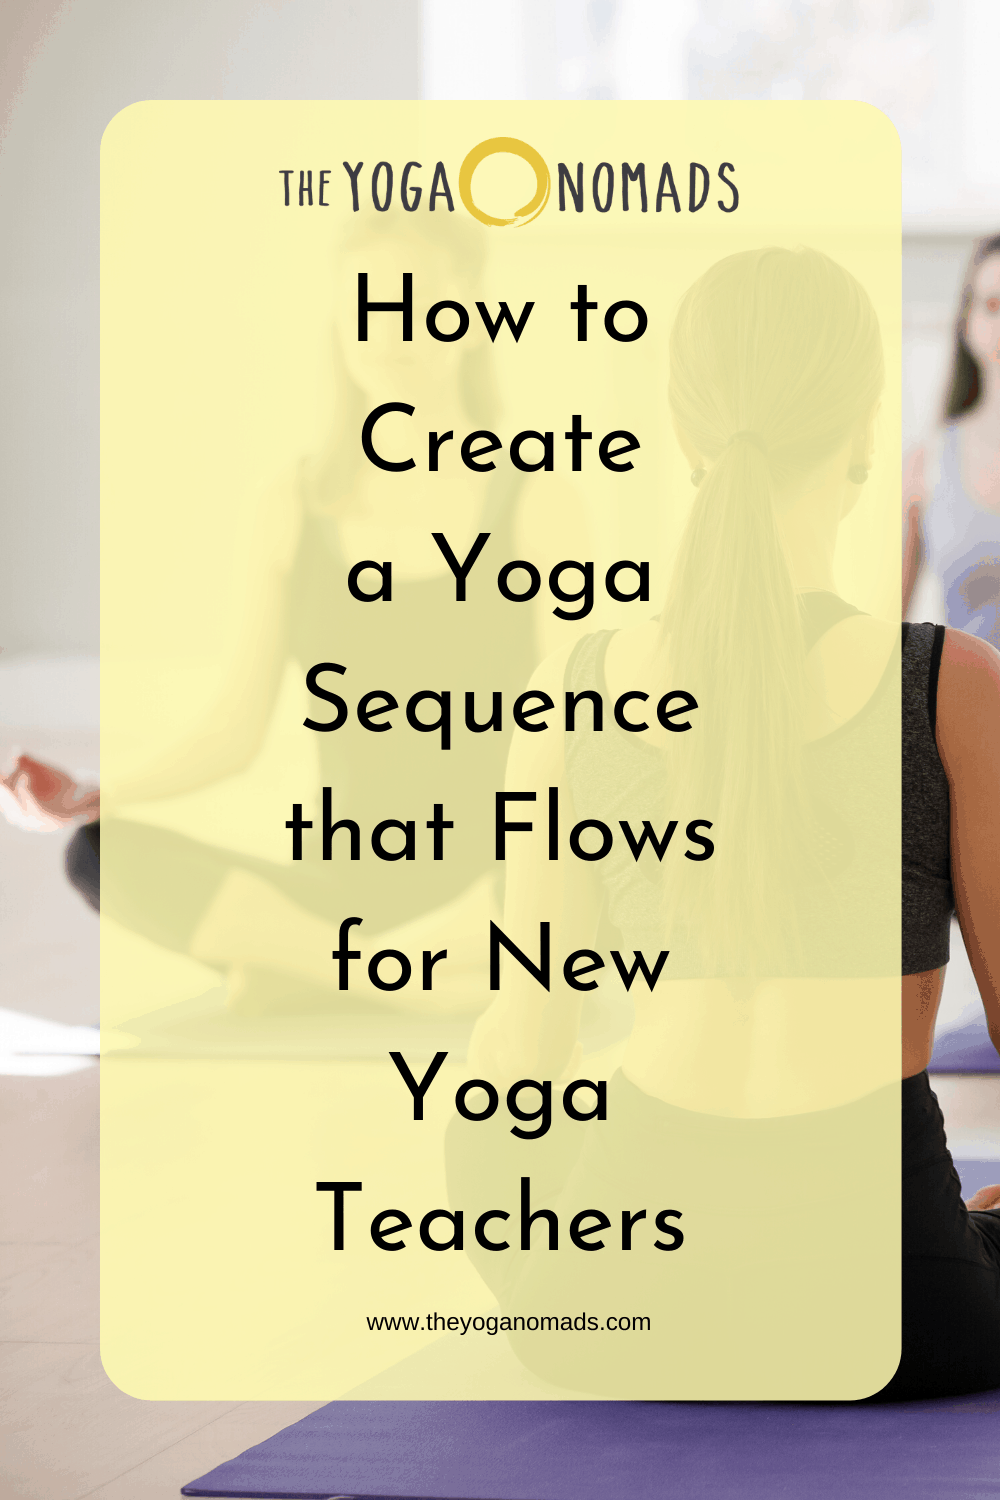 How to Create a Yoga Sequence that Flows for New Yoga Teachers